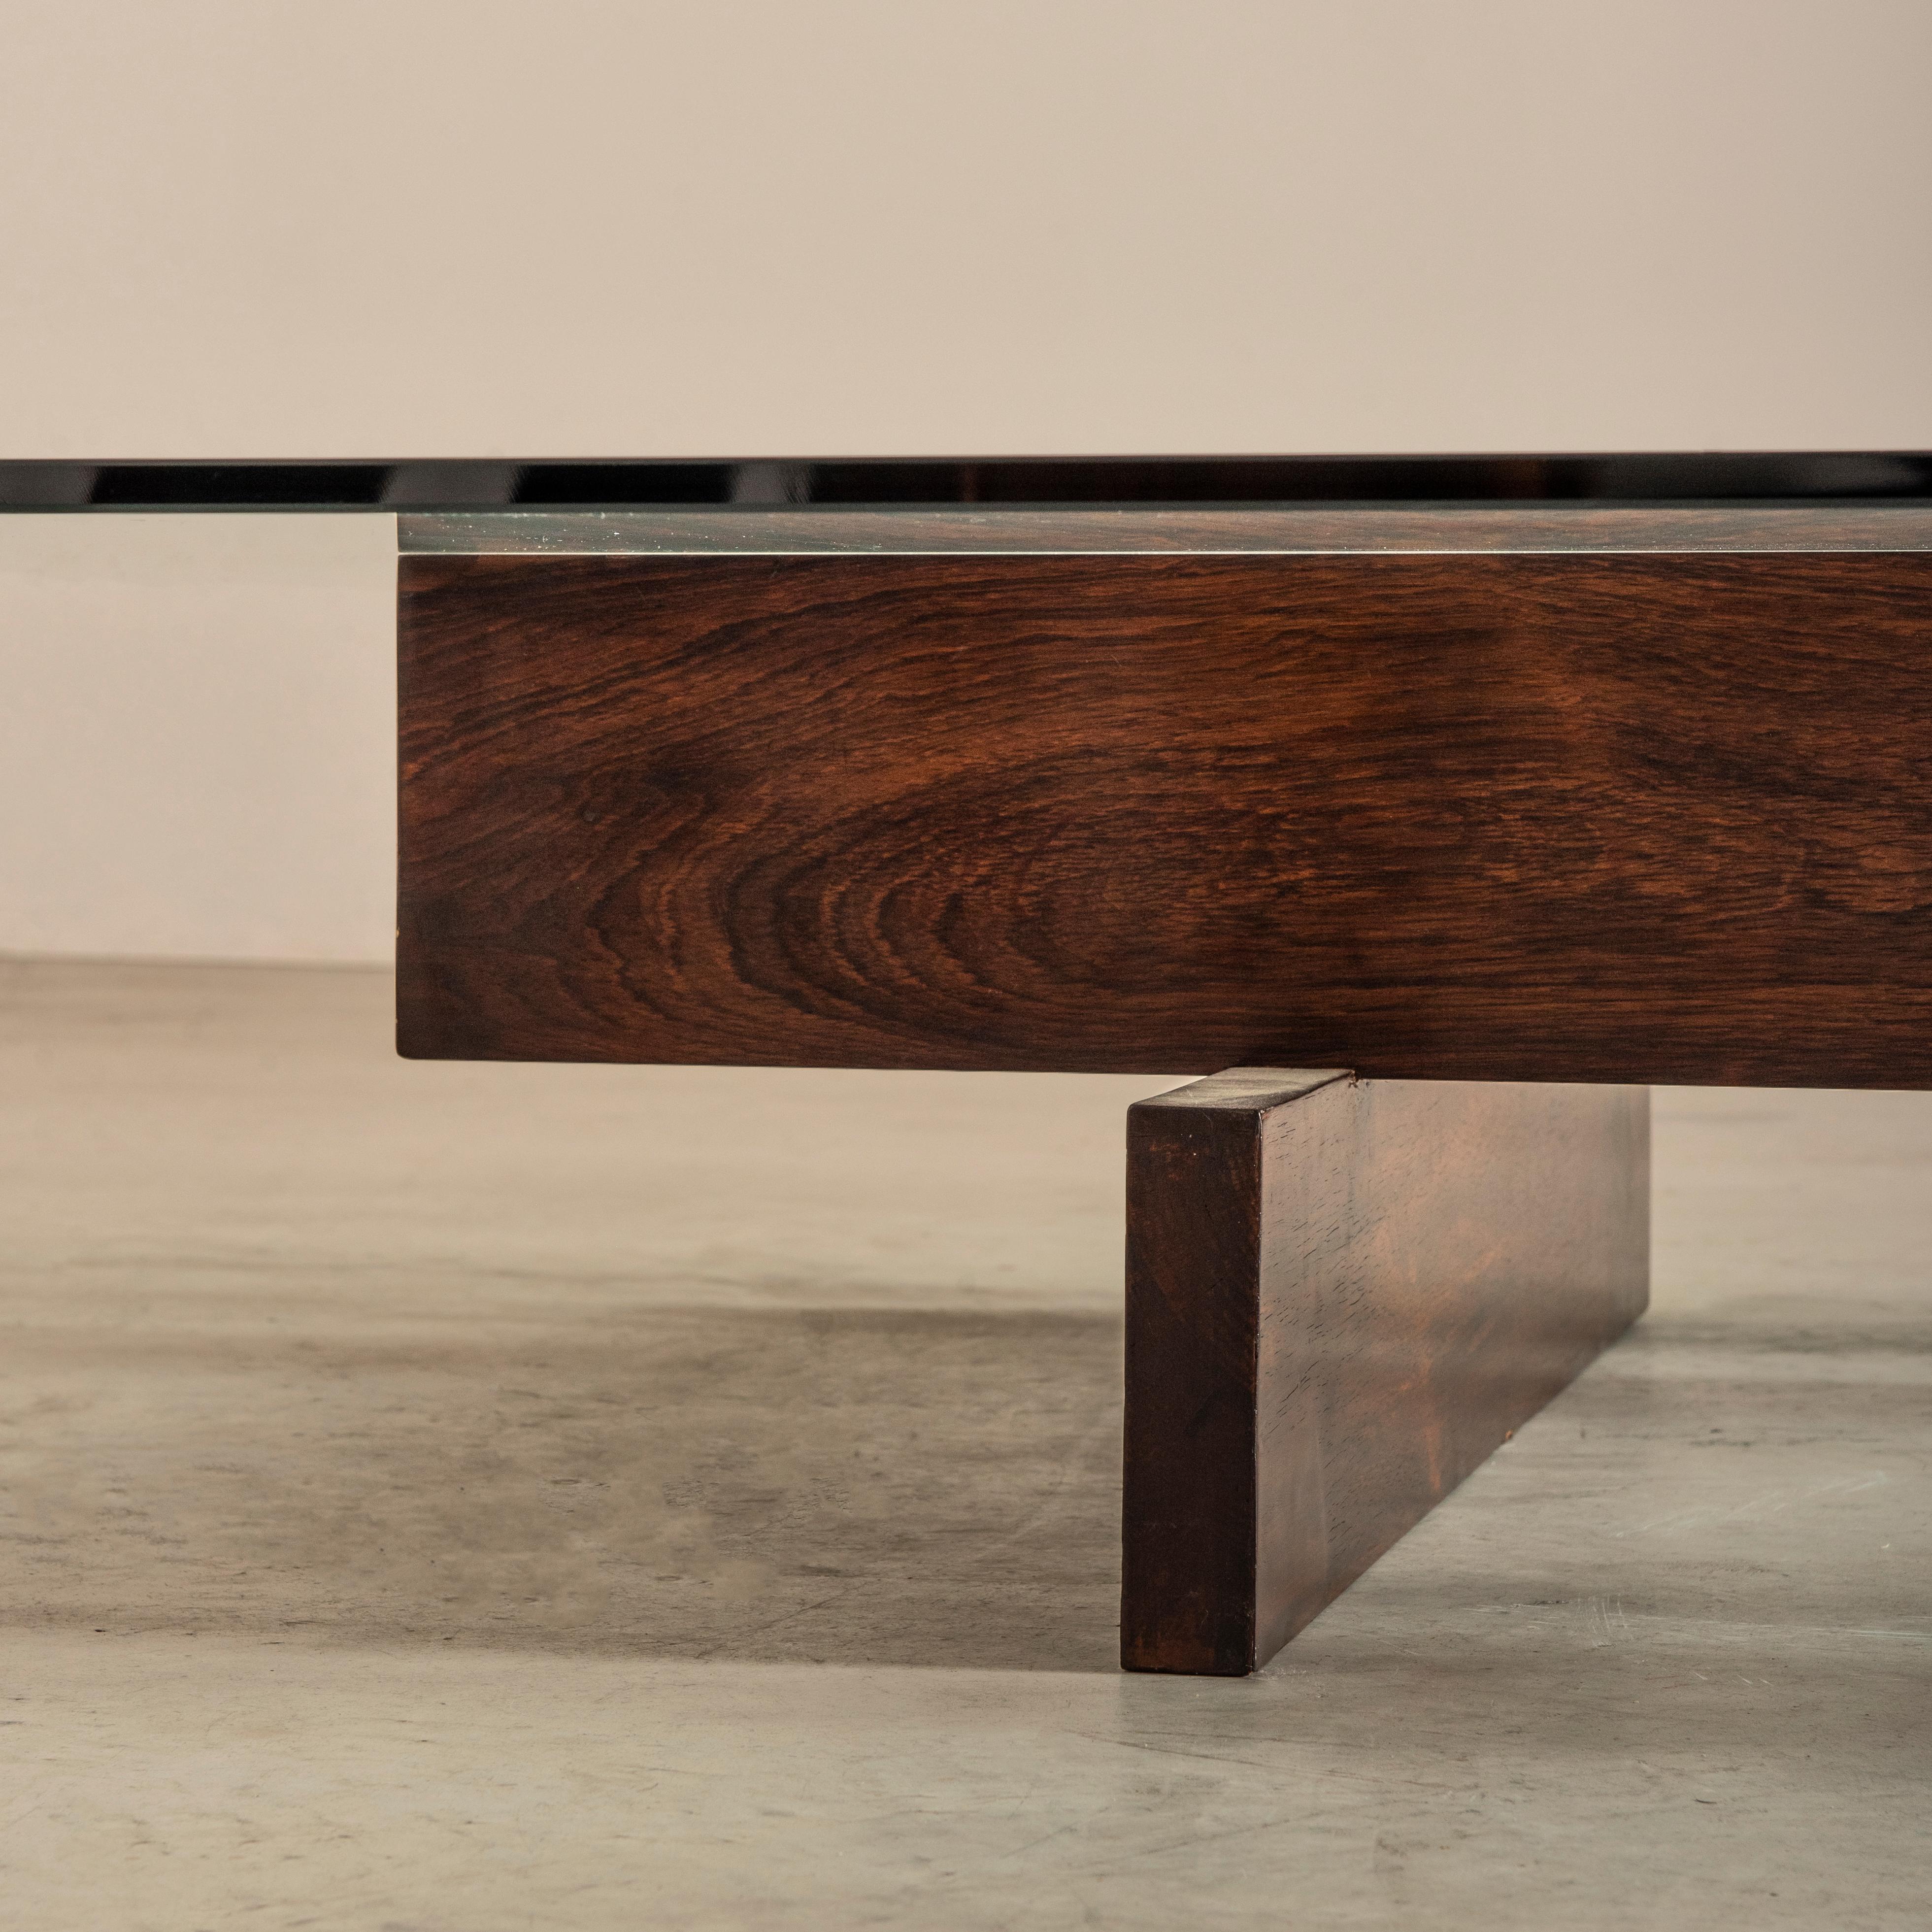 20th Century Grand Coffee Table in Wood and Glass by Celina Decorações, Brazilian Midcentury For Sale